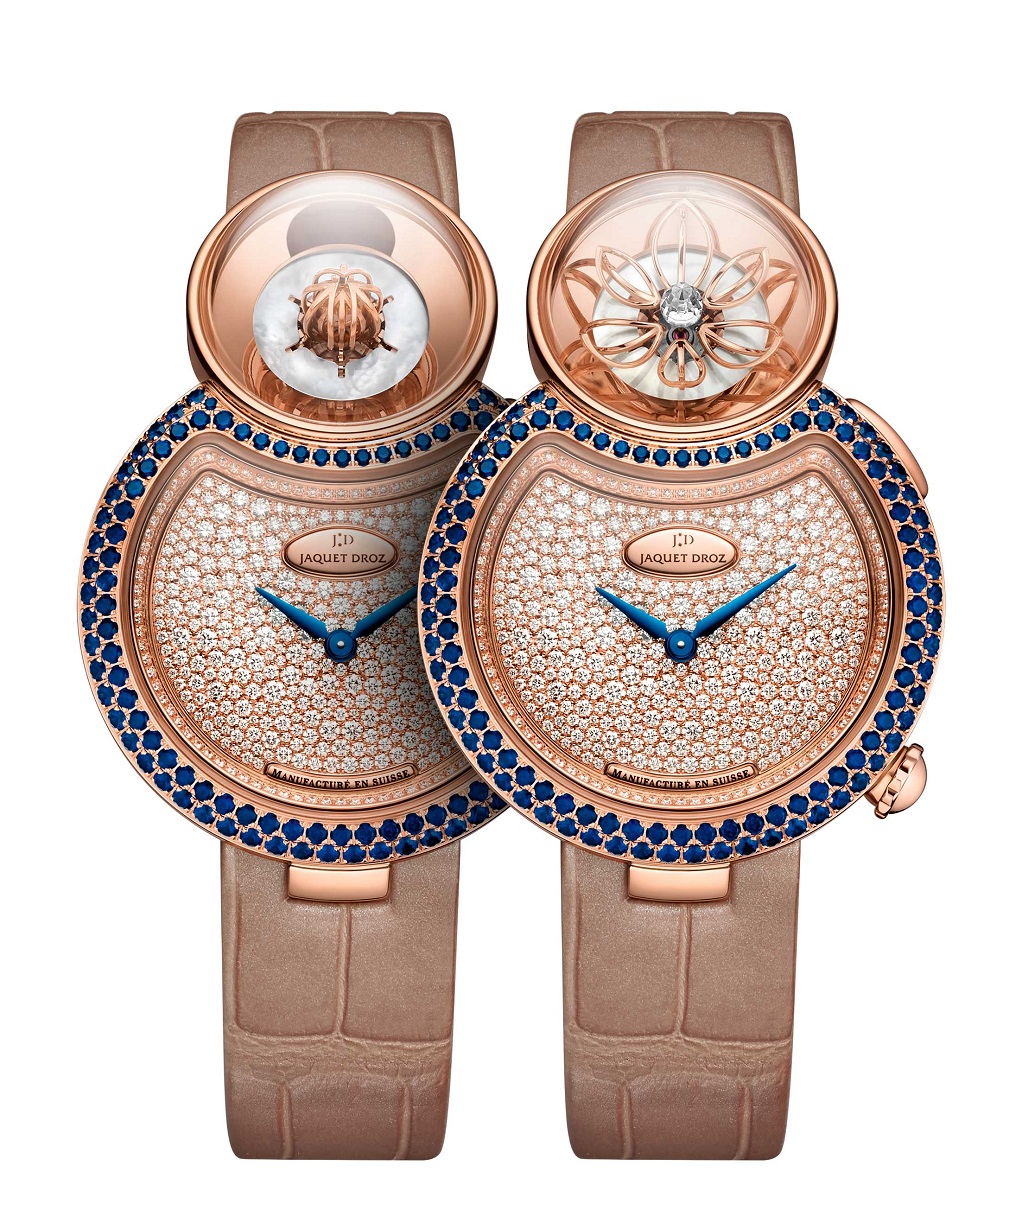 Two Beautiful And Powerful Watches For Women